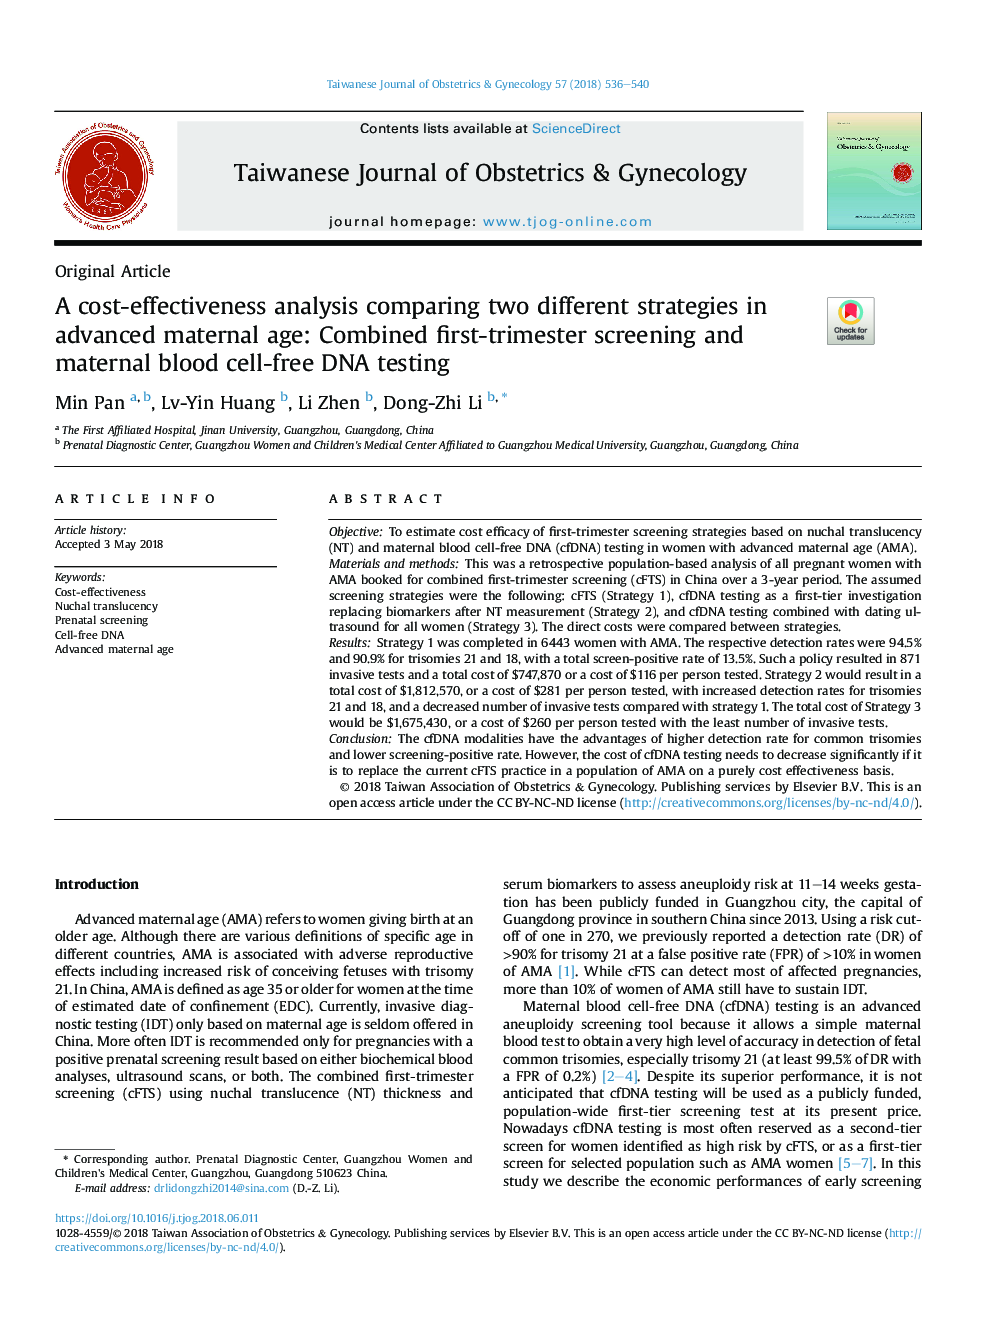 A cost-effectiveness analysis comparing two different strategies in advanced maternal age: Combined first-trimester screening and maternal blood cell-free DNA testing